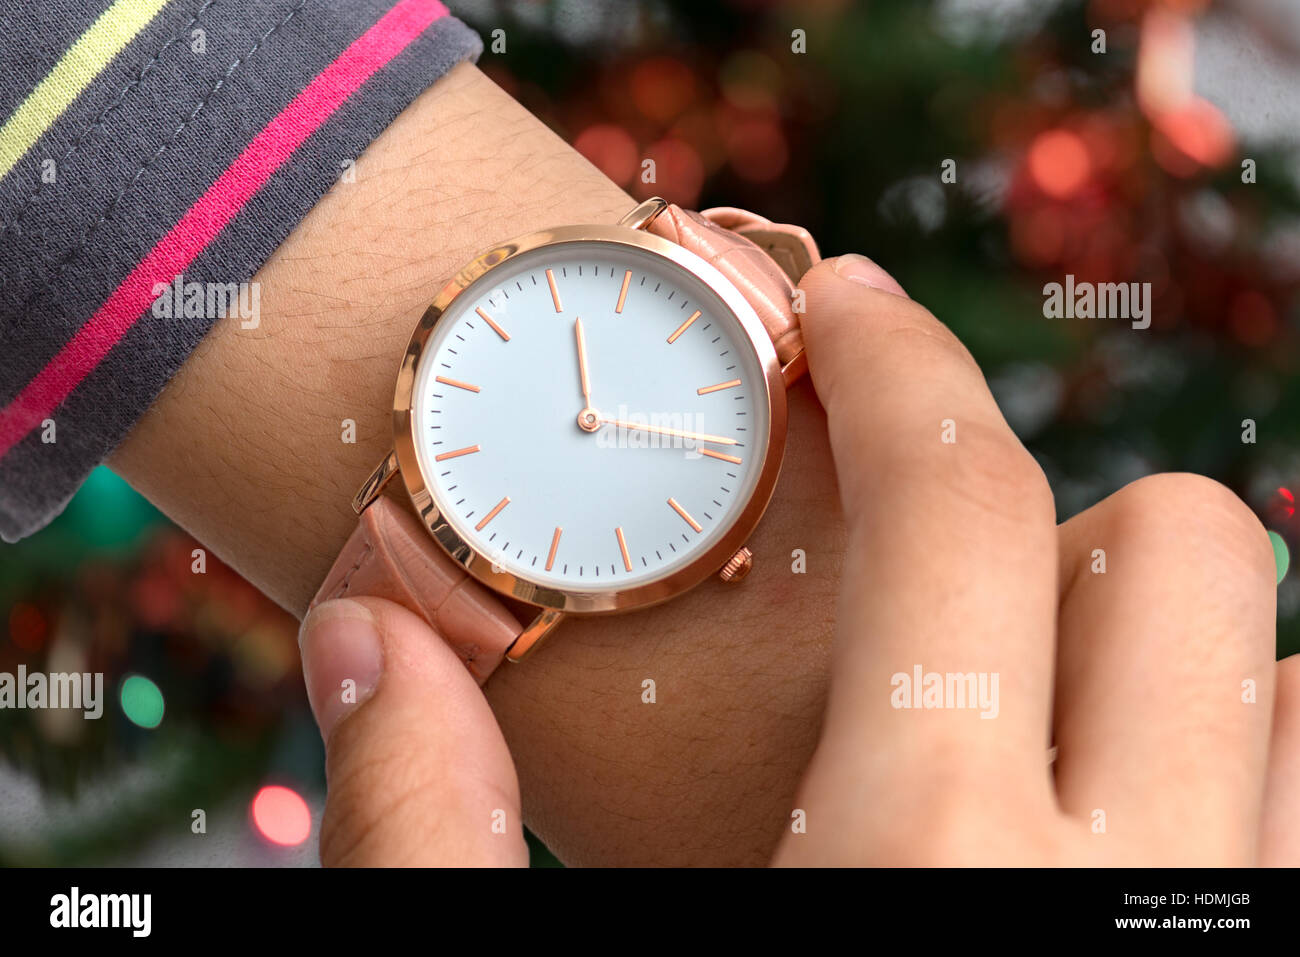 Girl's hand with wrist watch in Christmas time in front of Christmas tree in background Stock Photo